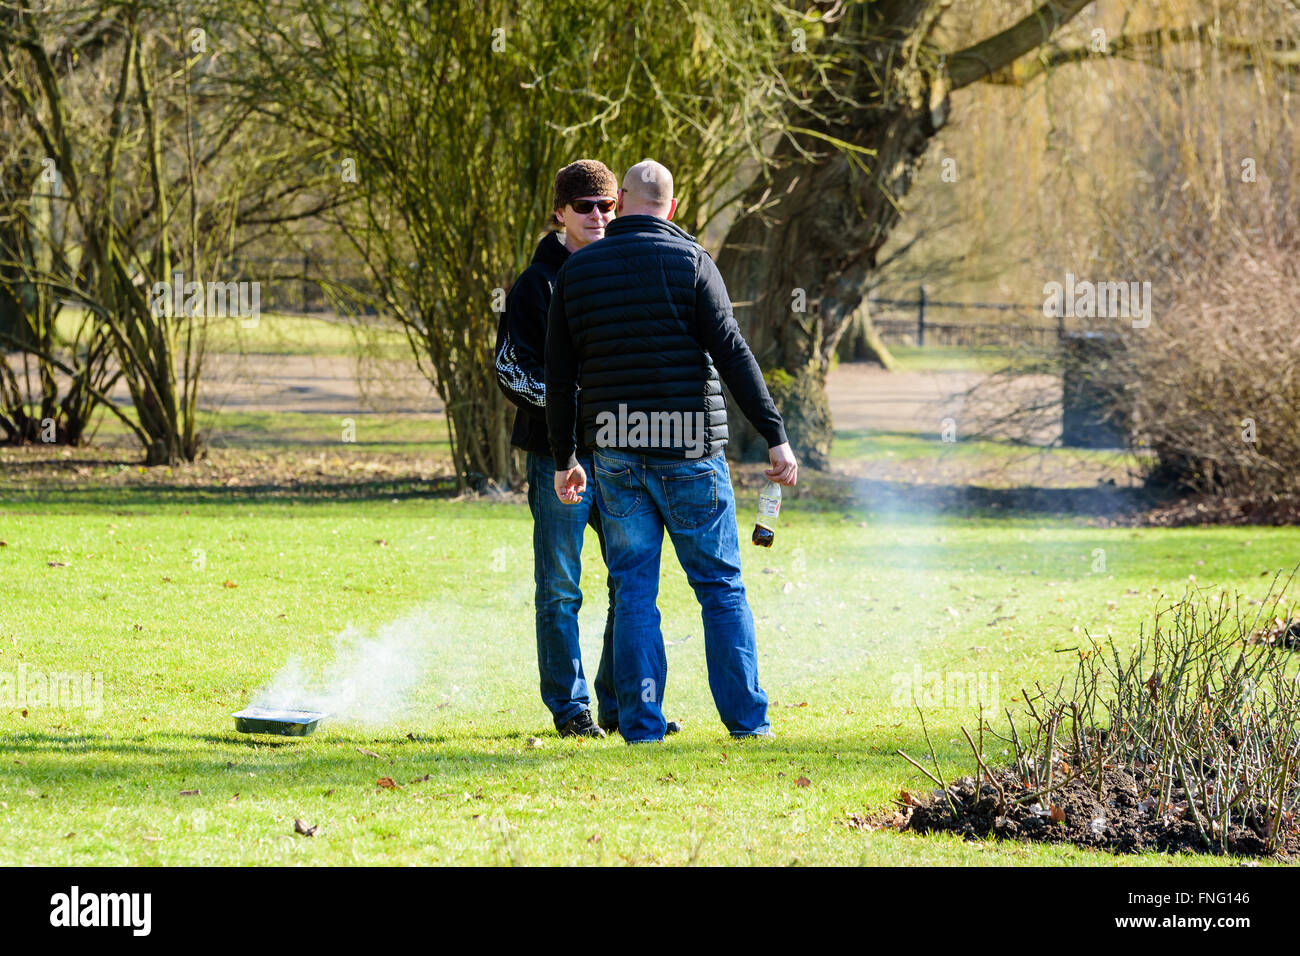 Lund, Sweden - March 12, 2016: Two males are having a conversation in the park. Beside them is a disposable grill on the lawn. R Stock Photo